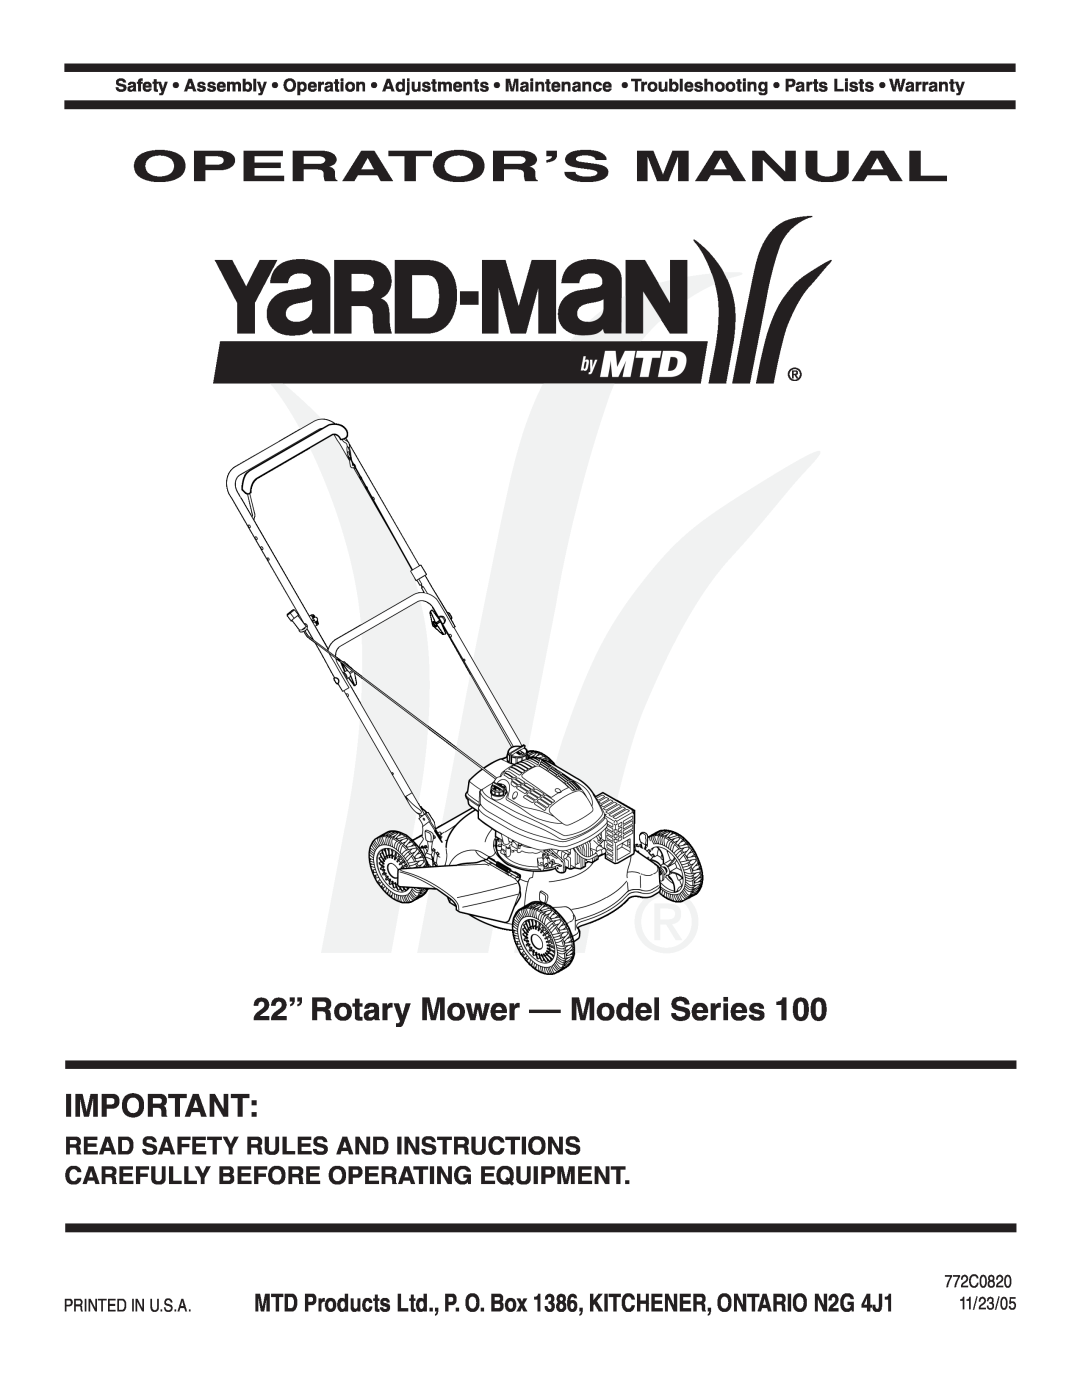 Yard-Man 100 manual Operator’S Manual, 22” Rotary Mower - Model Series, Read Safety Rules And Instructions 